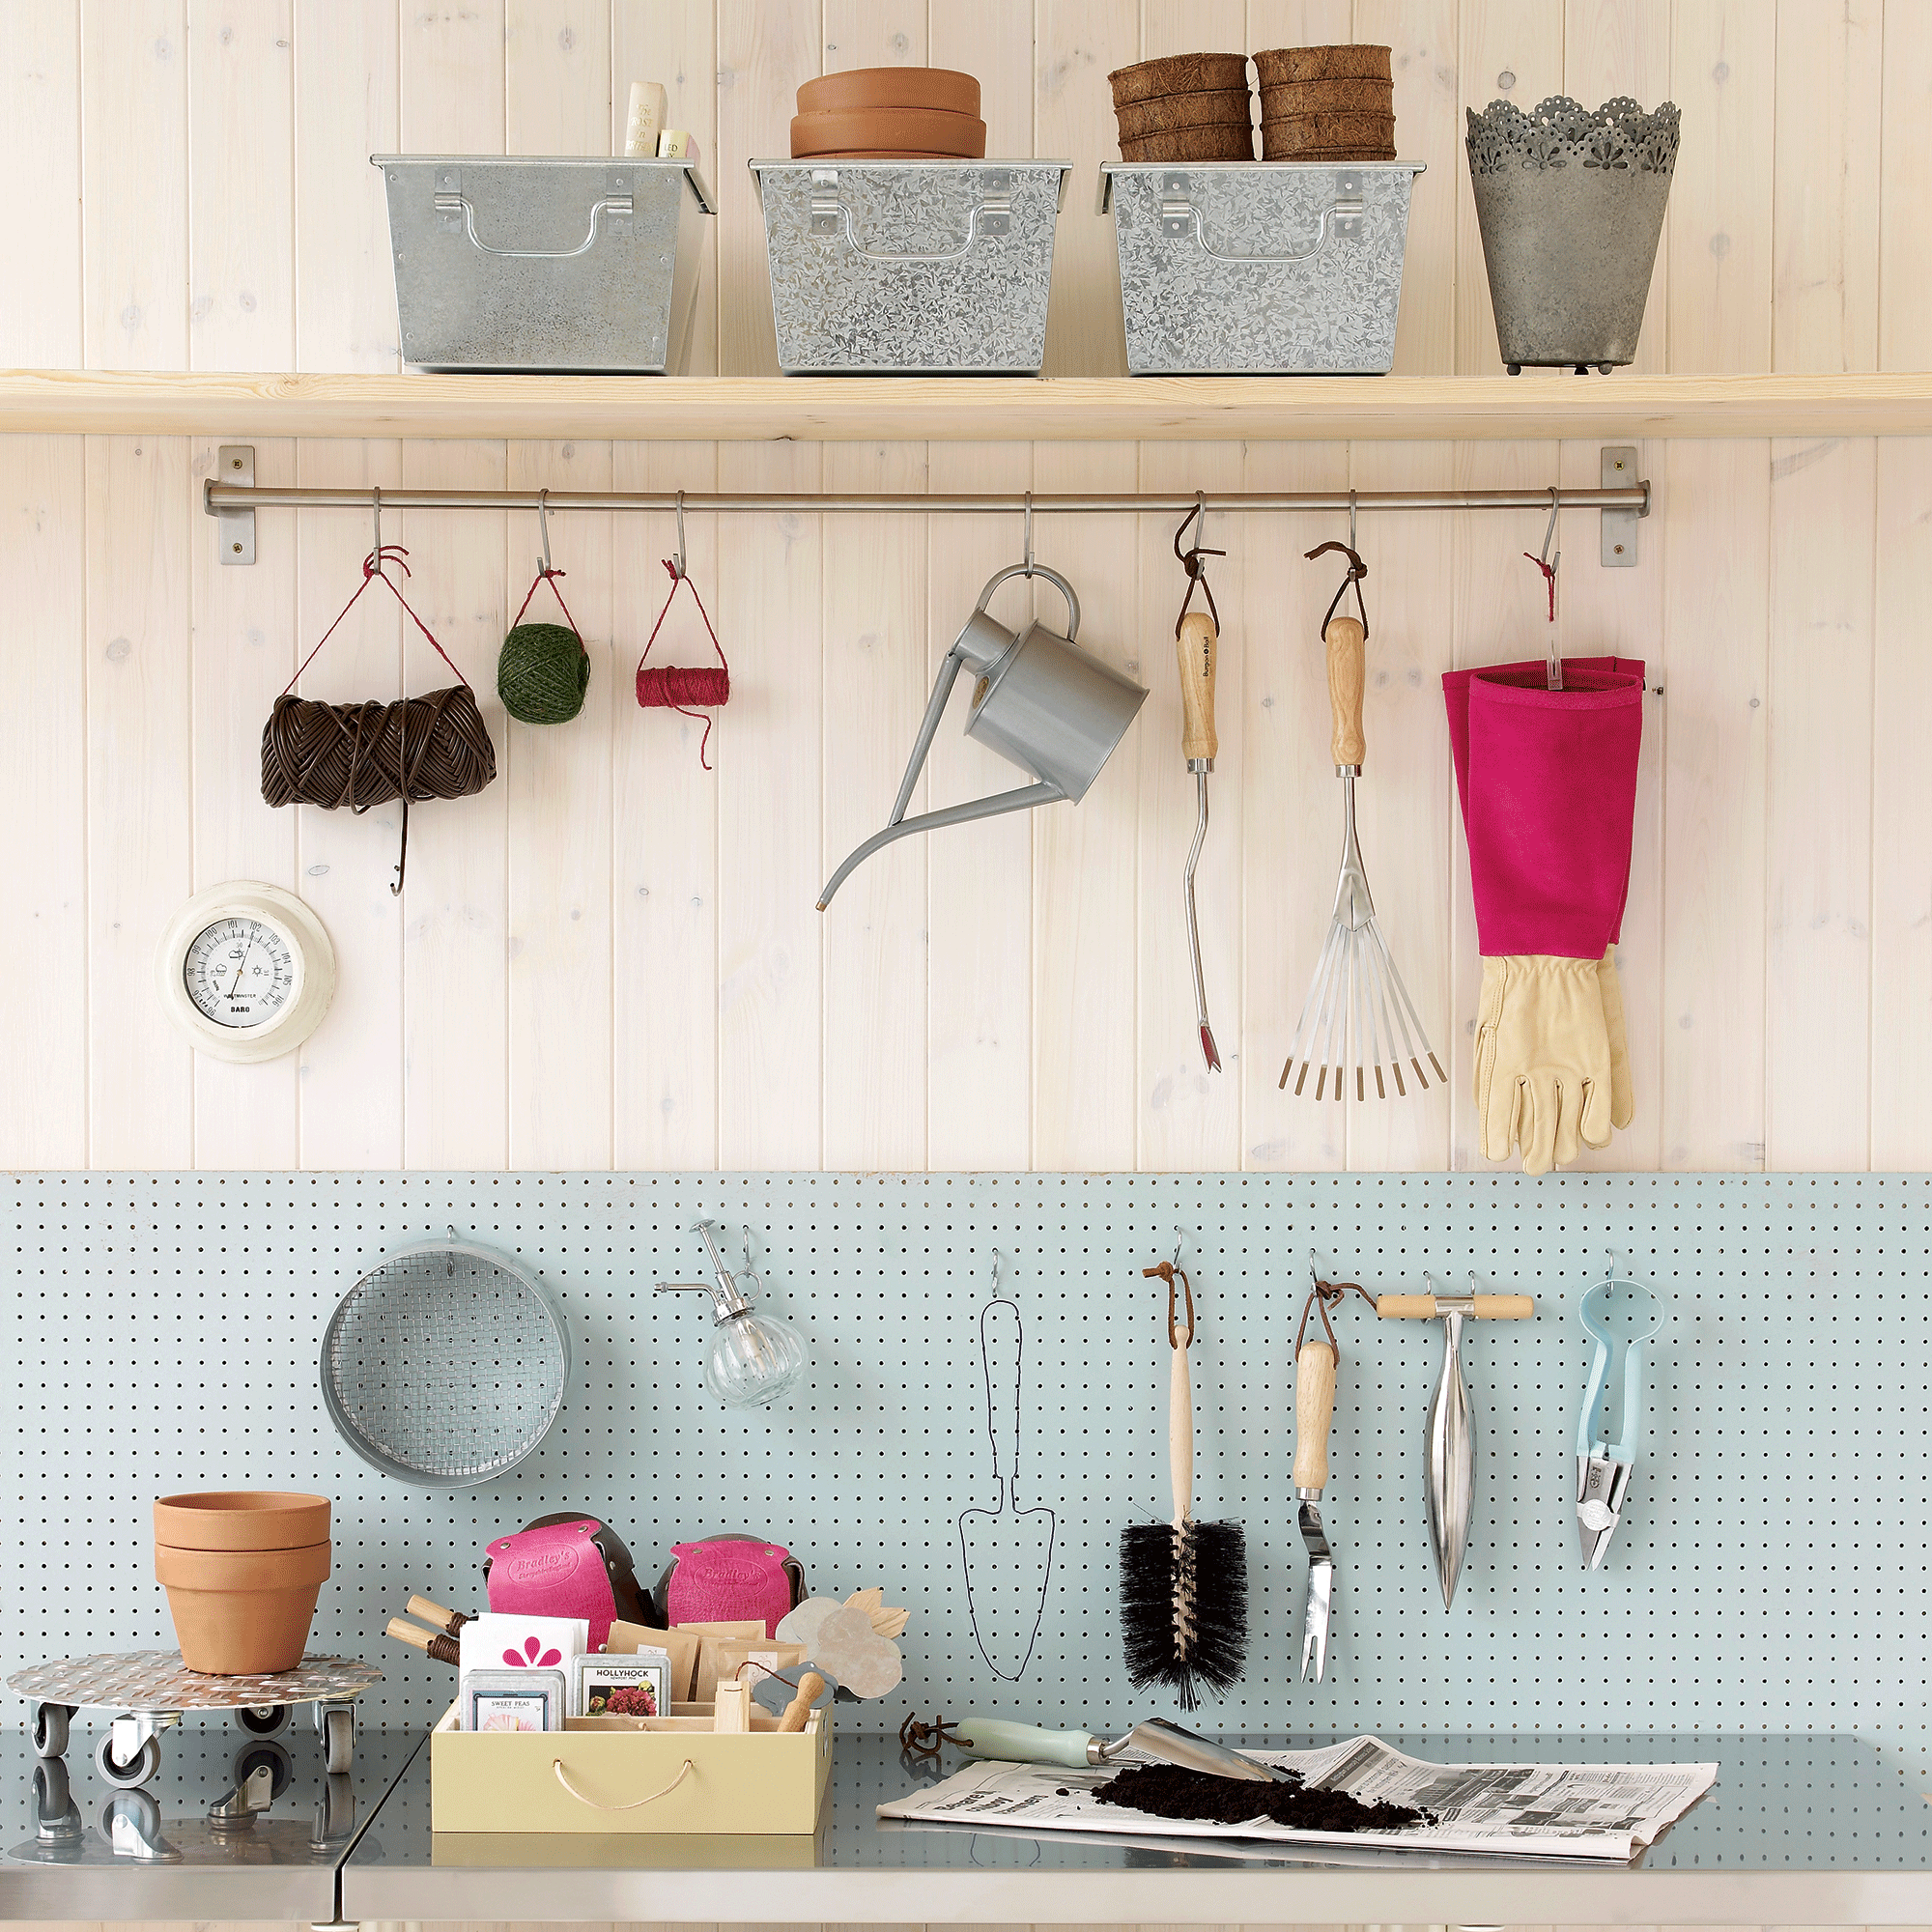 Potting bench with tools hanging on wall